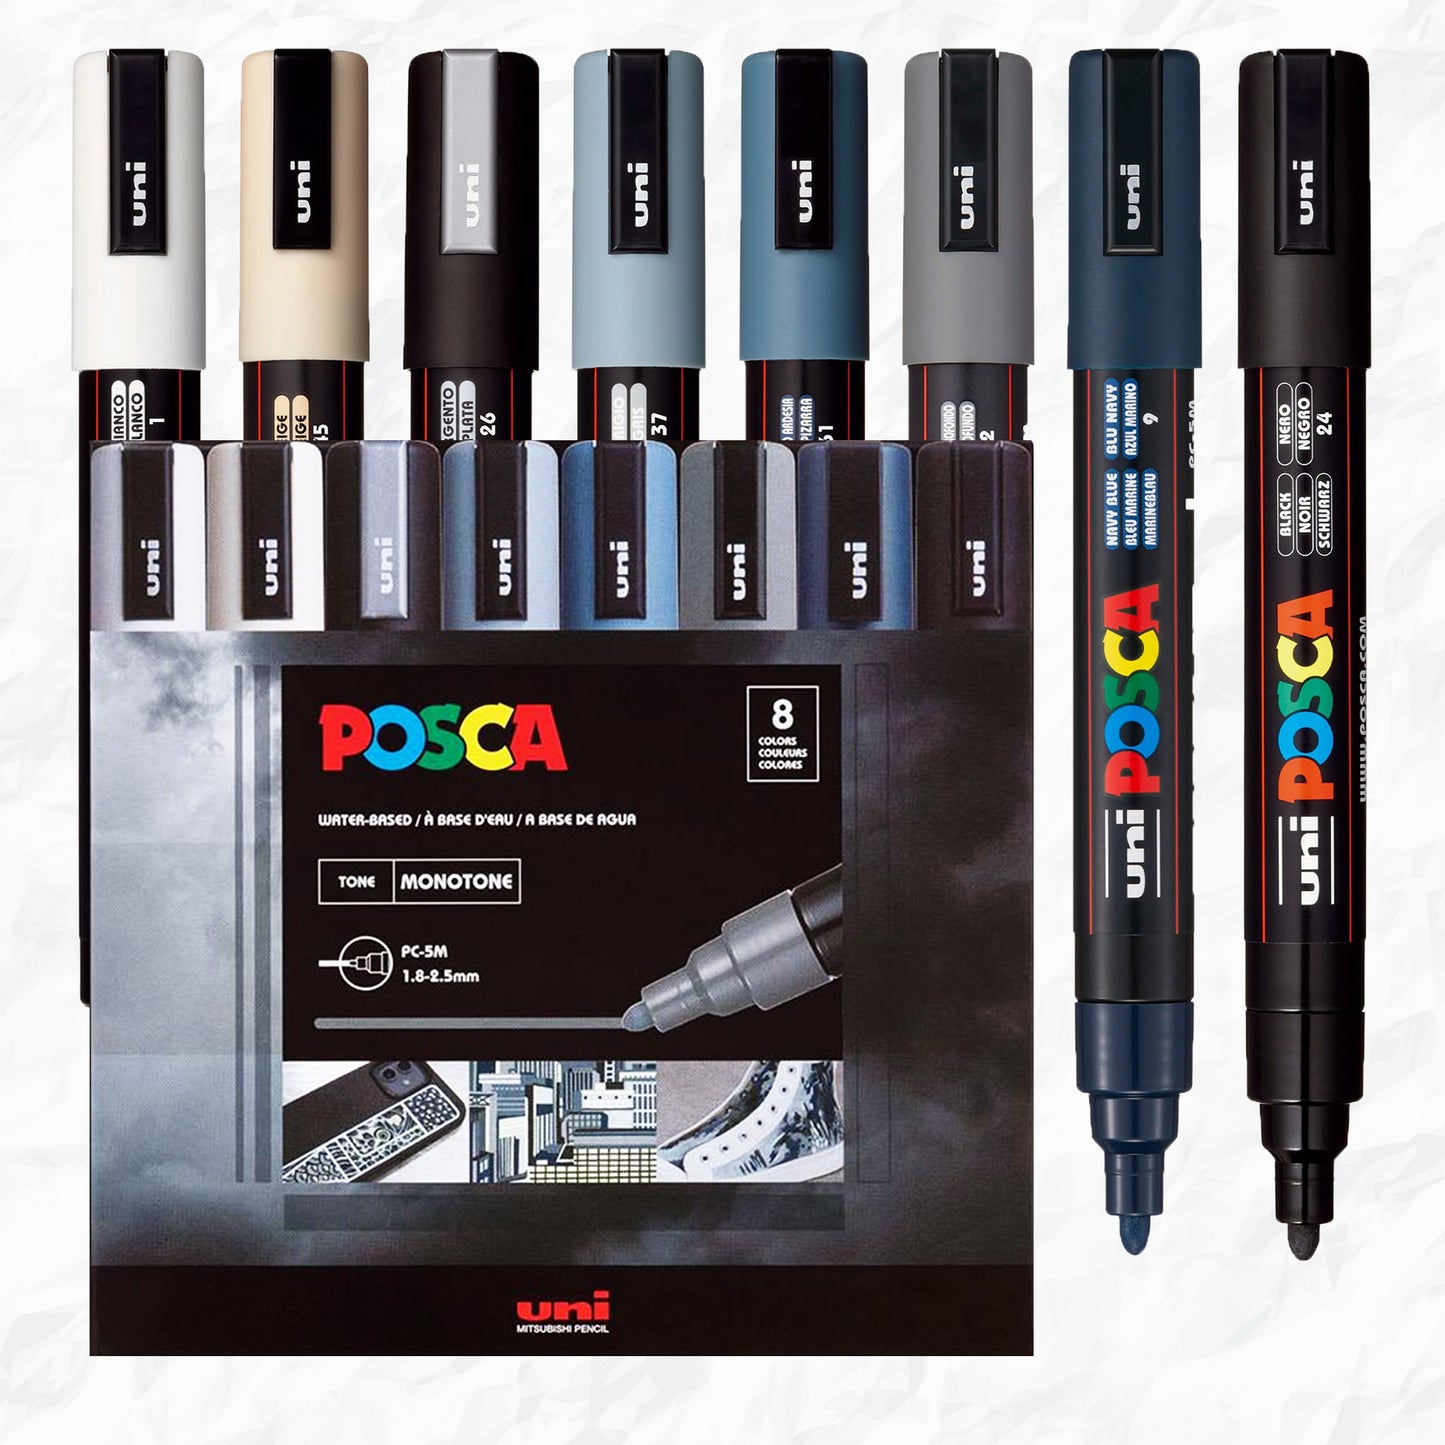 POSCA water-based art paint markers, size 5M medium round, eight piece pack in monotone colors.